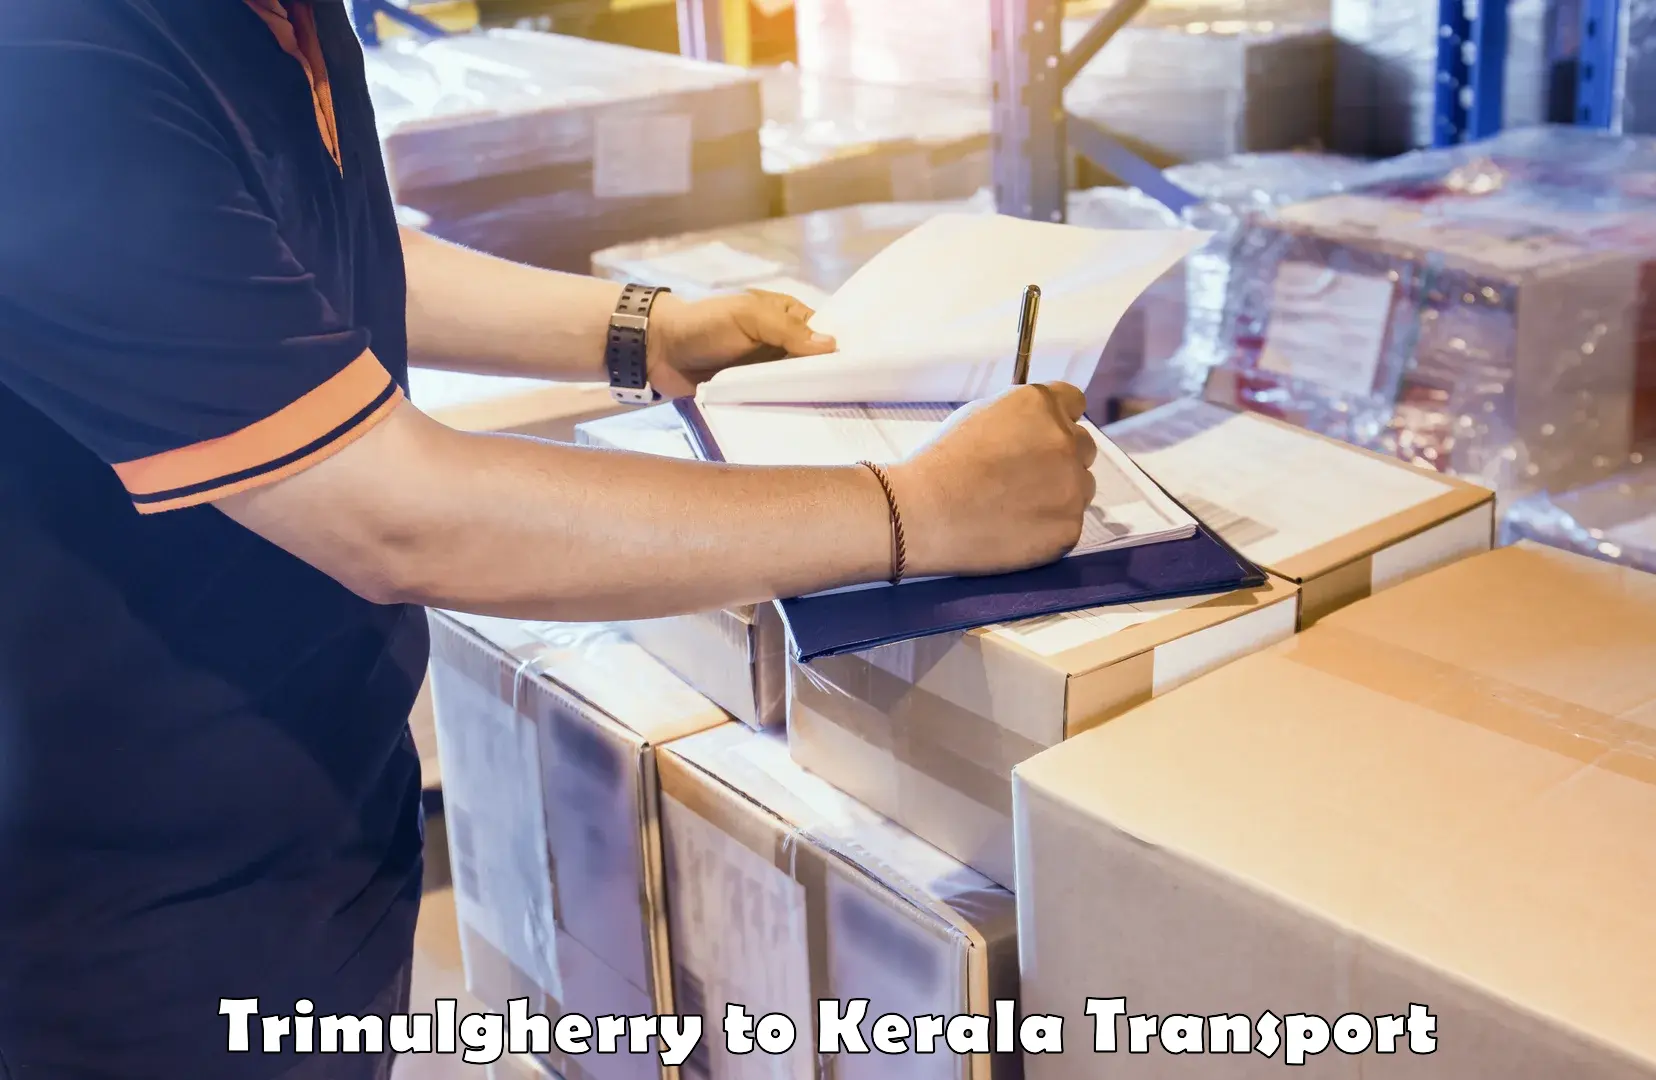 Parcel transport services in Trimulgherry to Kanhangad